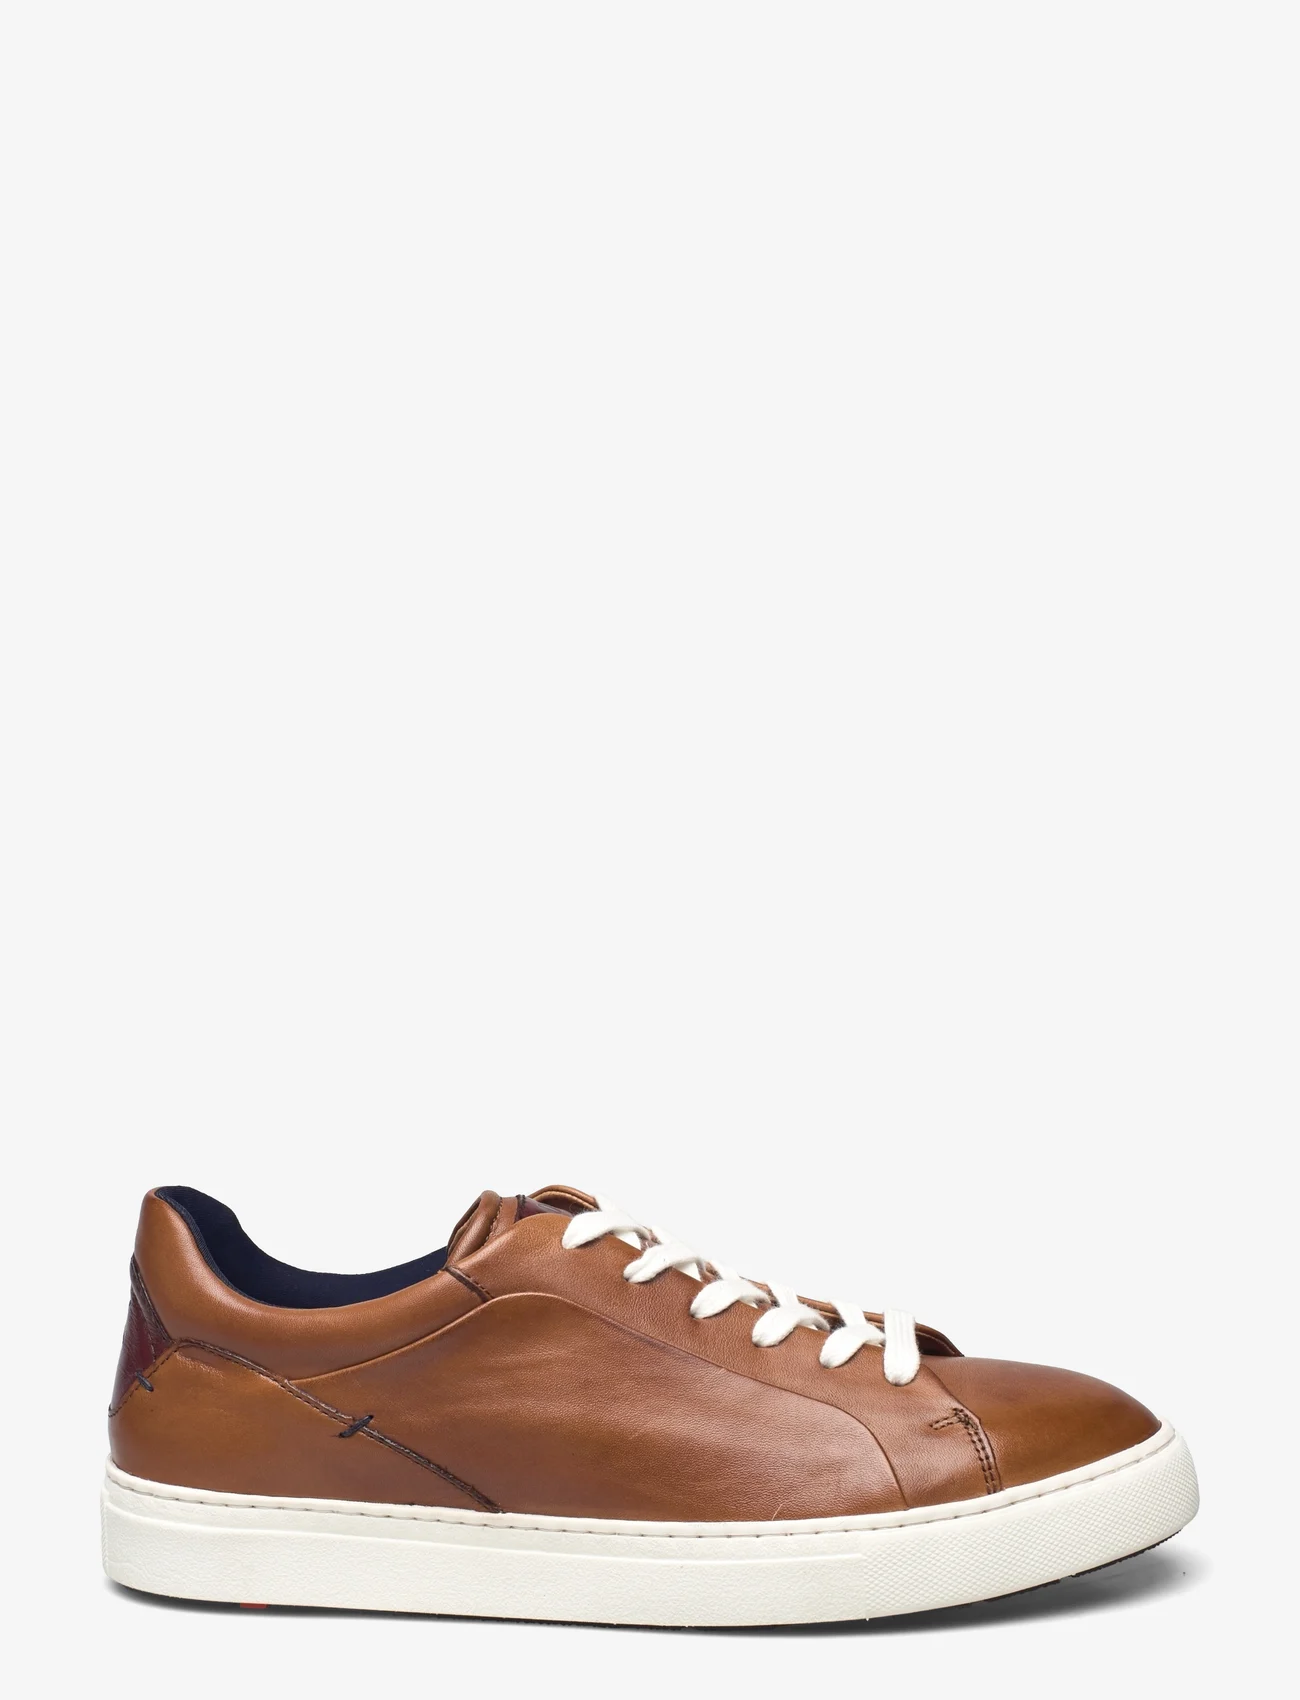 Lloyd - MAJURO - lave sneakers - 3 - whisky/piemont - 1